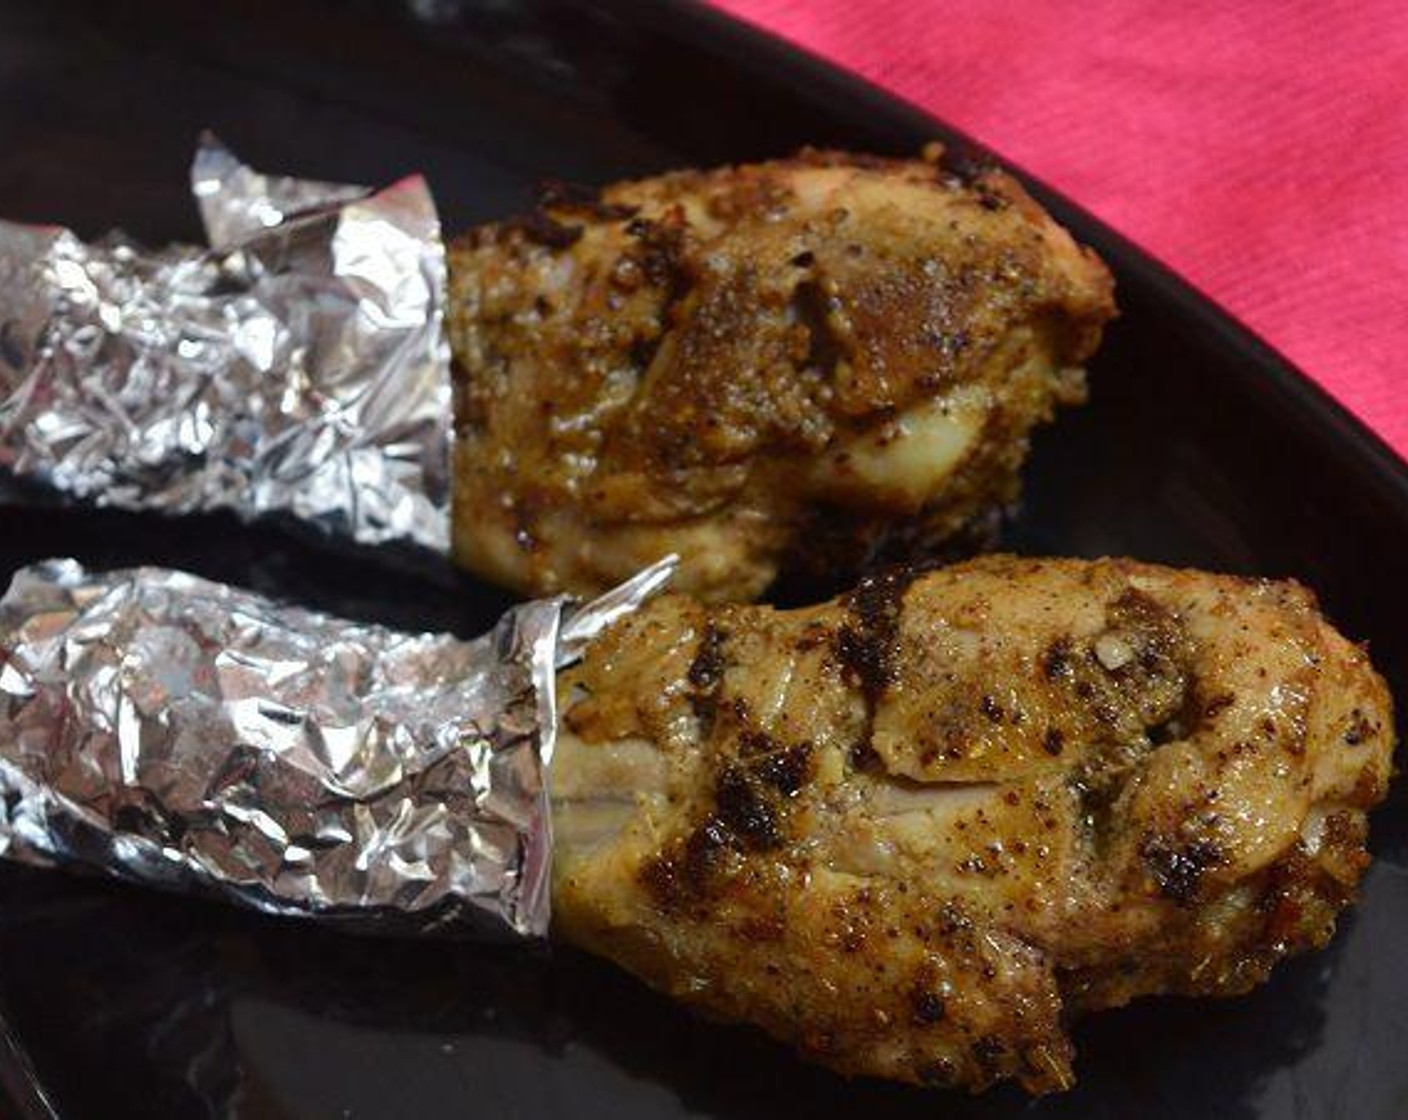 step 7 Serve with Lemon (1) and a sprinkle of Poultry Seasoning (to taste). Onion salad & Green coriander chutney are great side accompaniment. Cover the end of the drumstick with foil for easy handling.